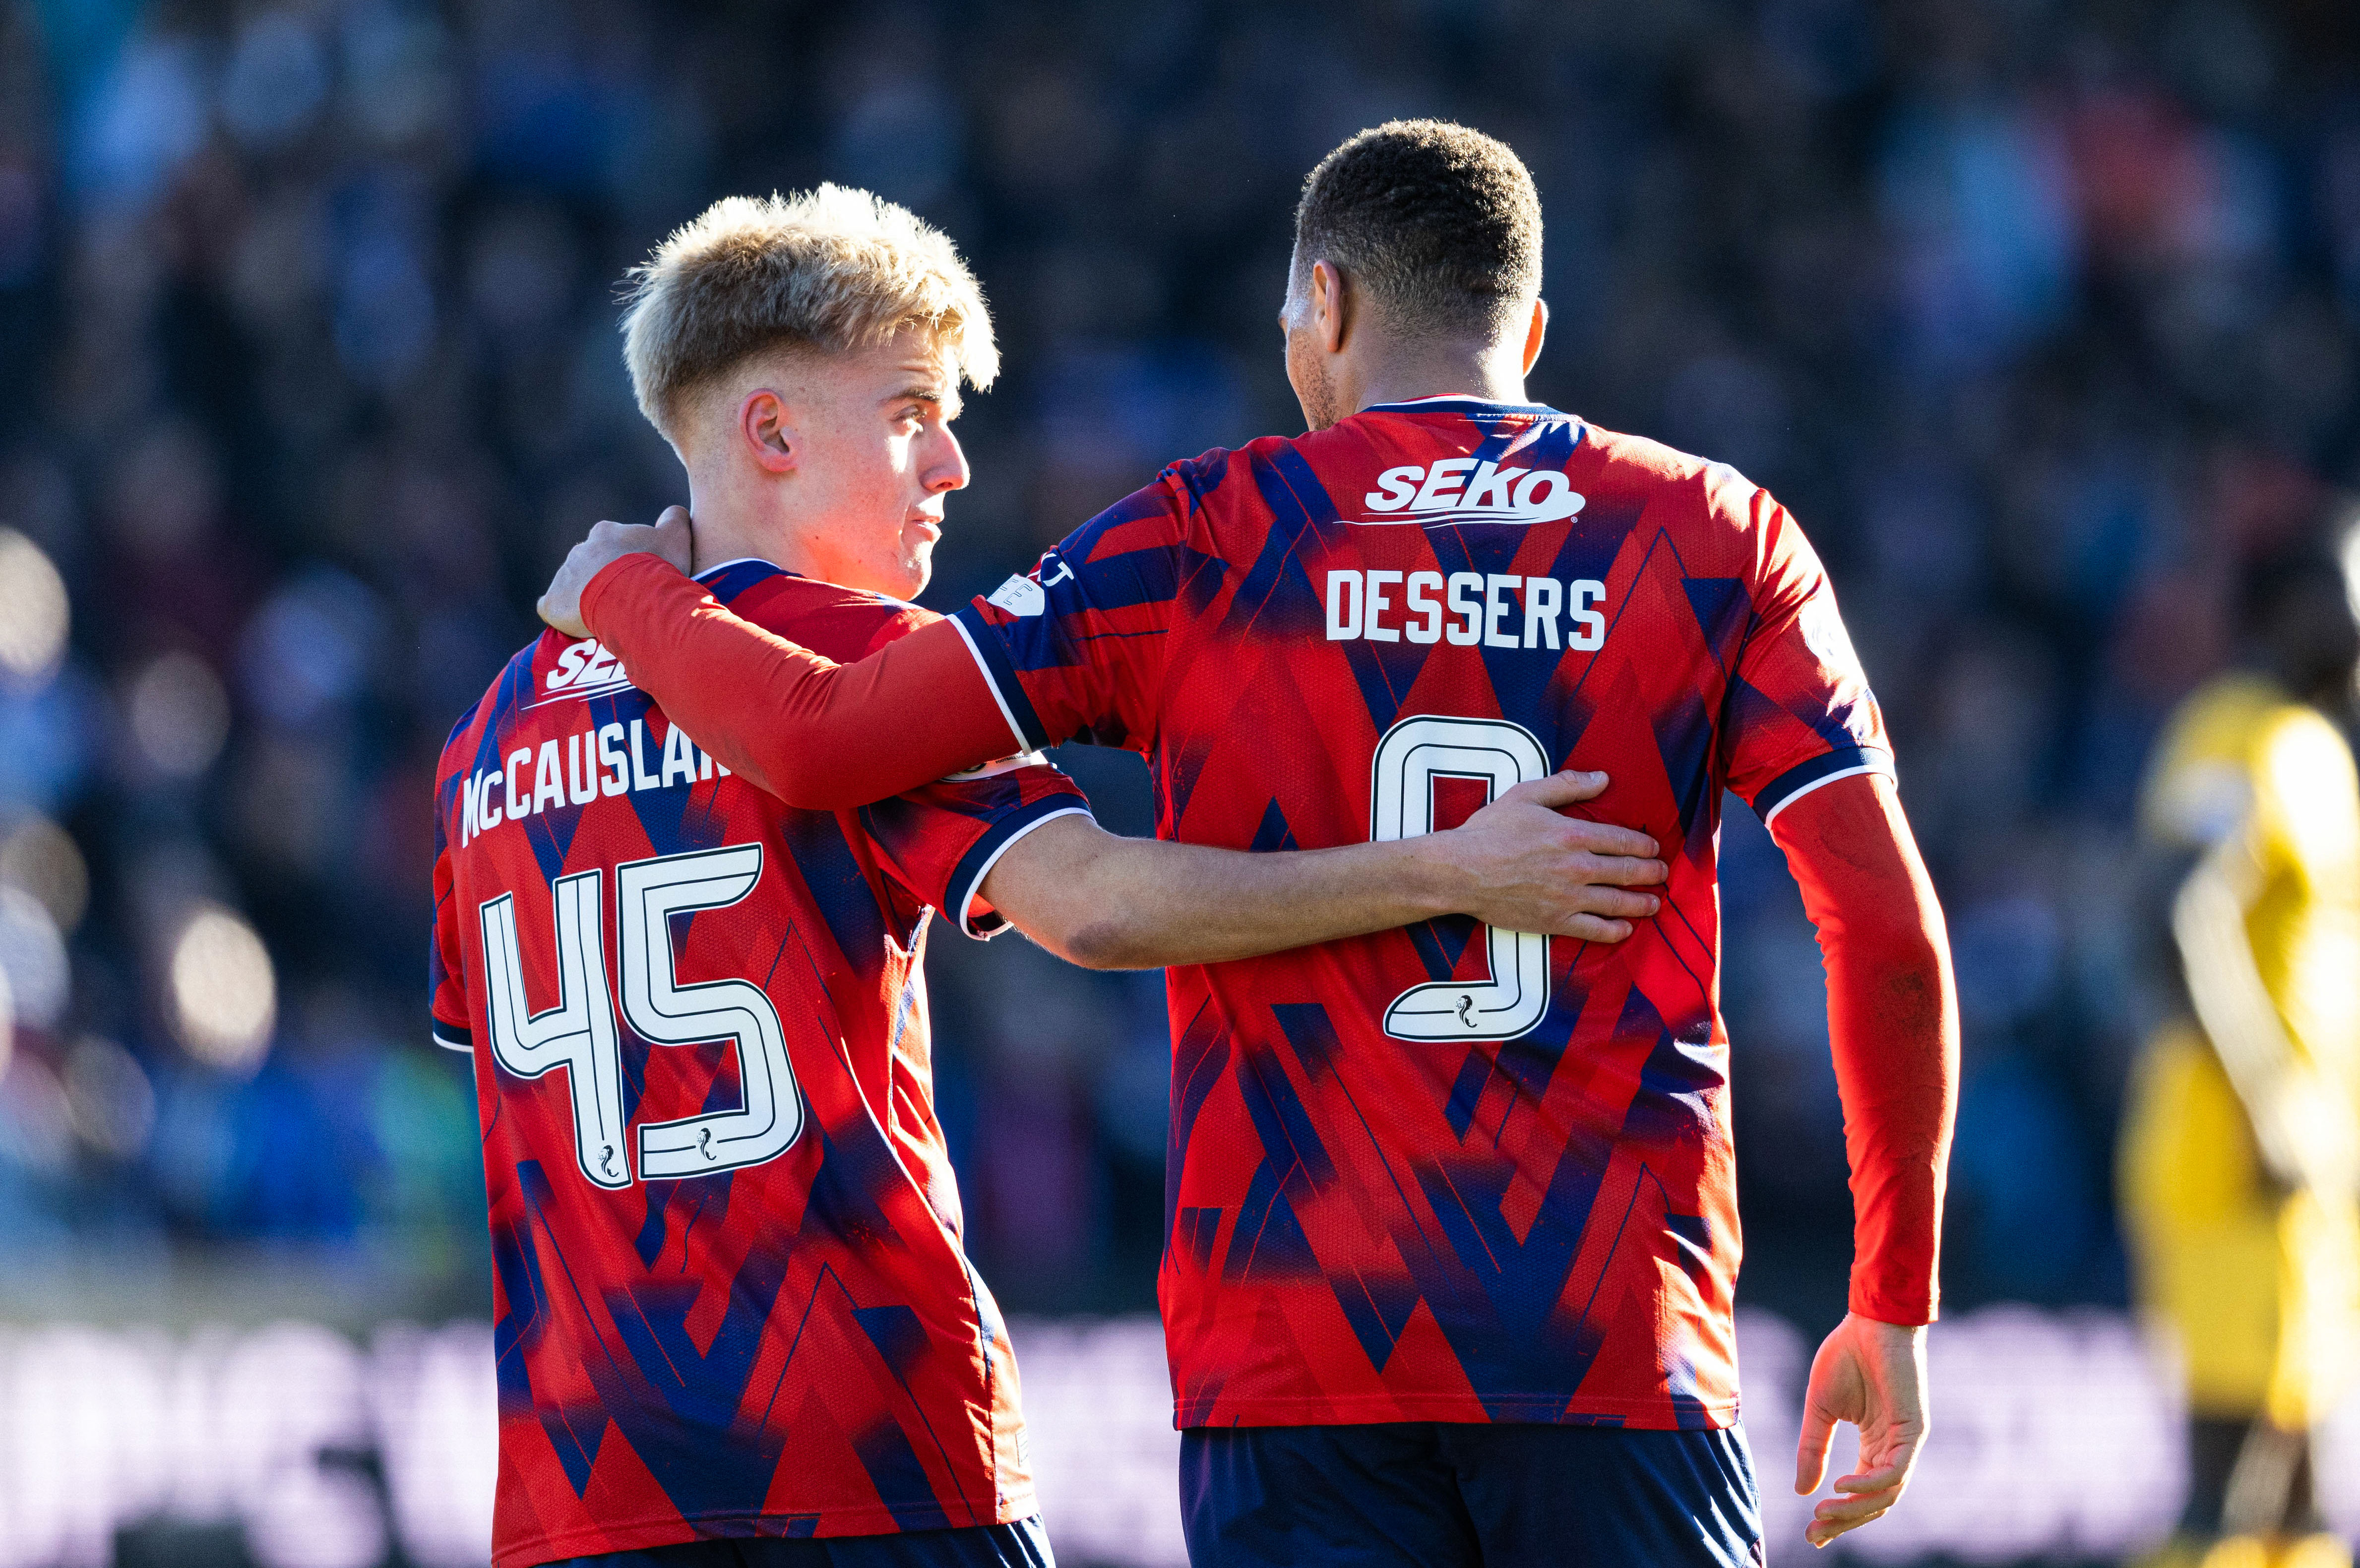 Rangers striker Cyriel Dessers insists that the “goals will come very soon” for Gers youngster Ross McCausland.